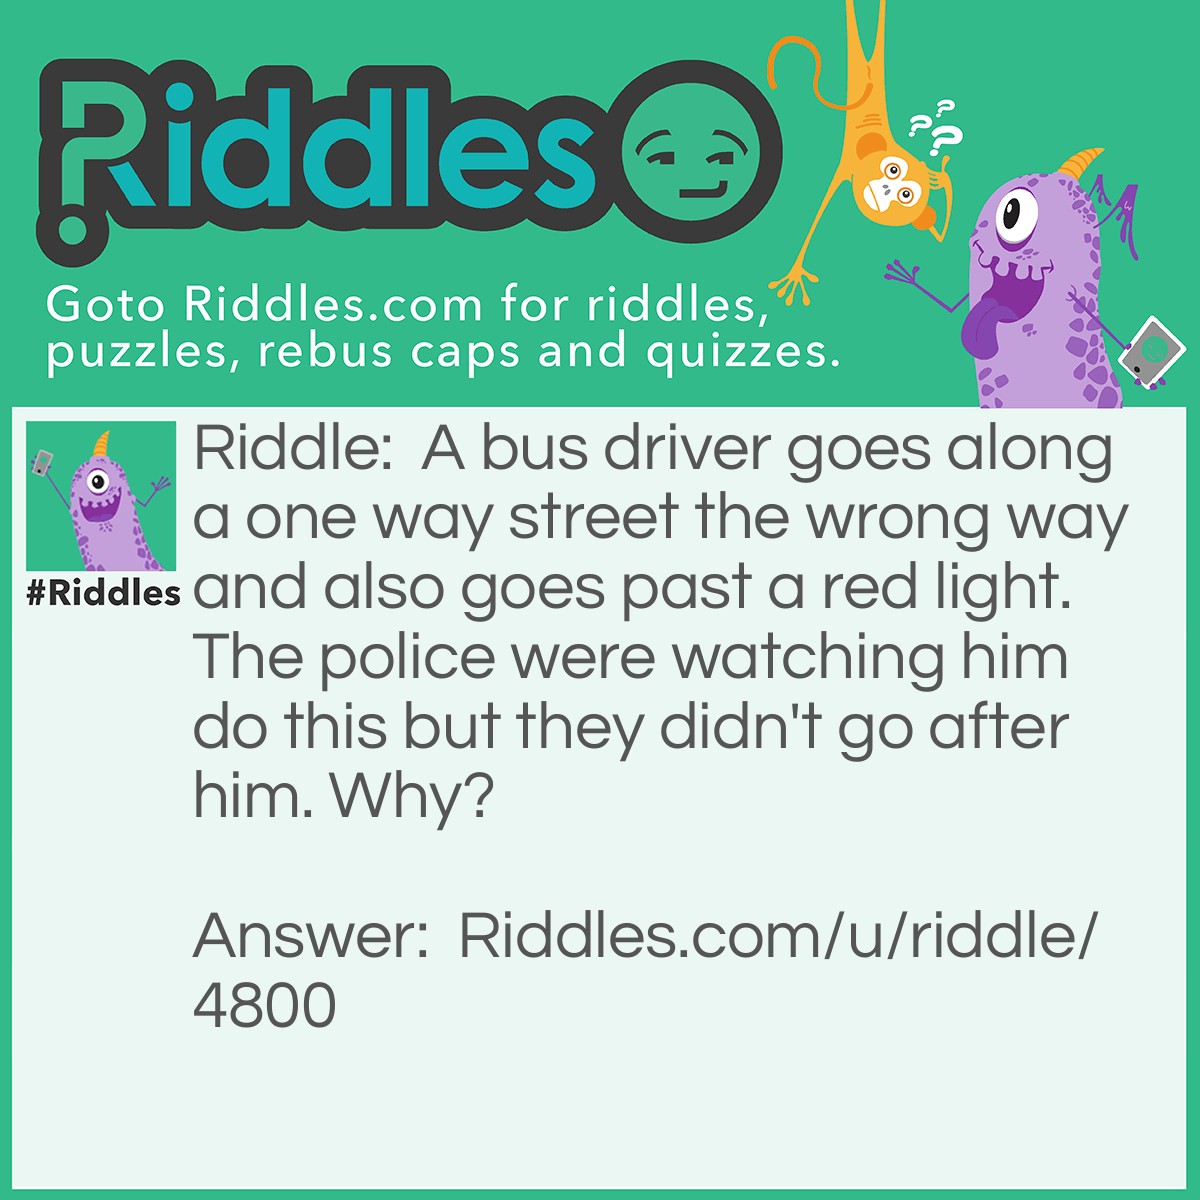 Riddle: A bus driver goes along a one way street the wrong way and also goes past a red light. The police were watching him do this but they didn't go after him. Why? Answer: He was walking!